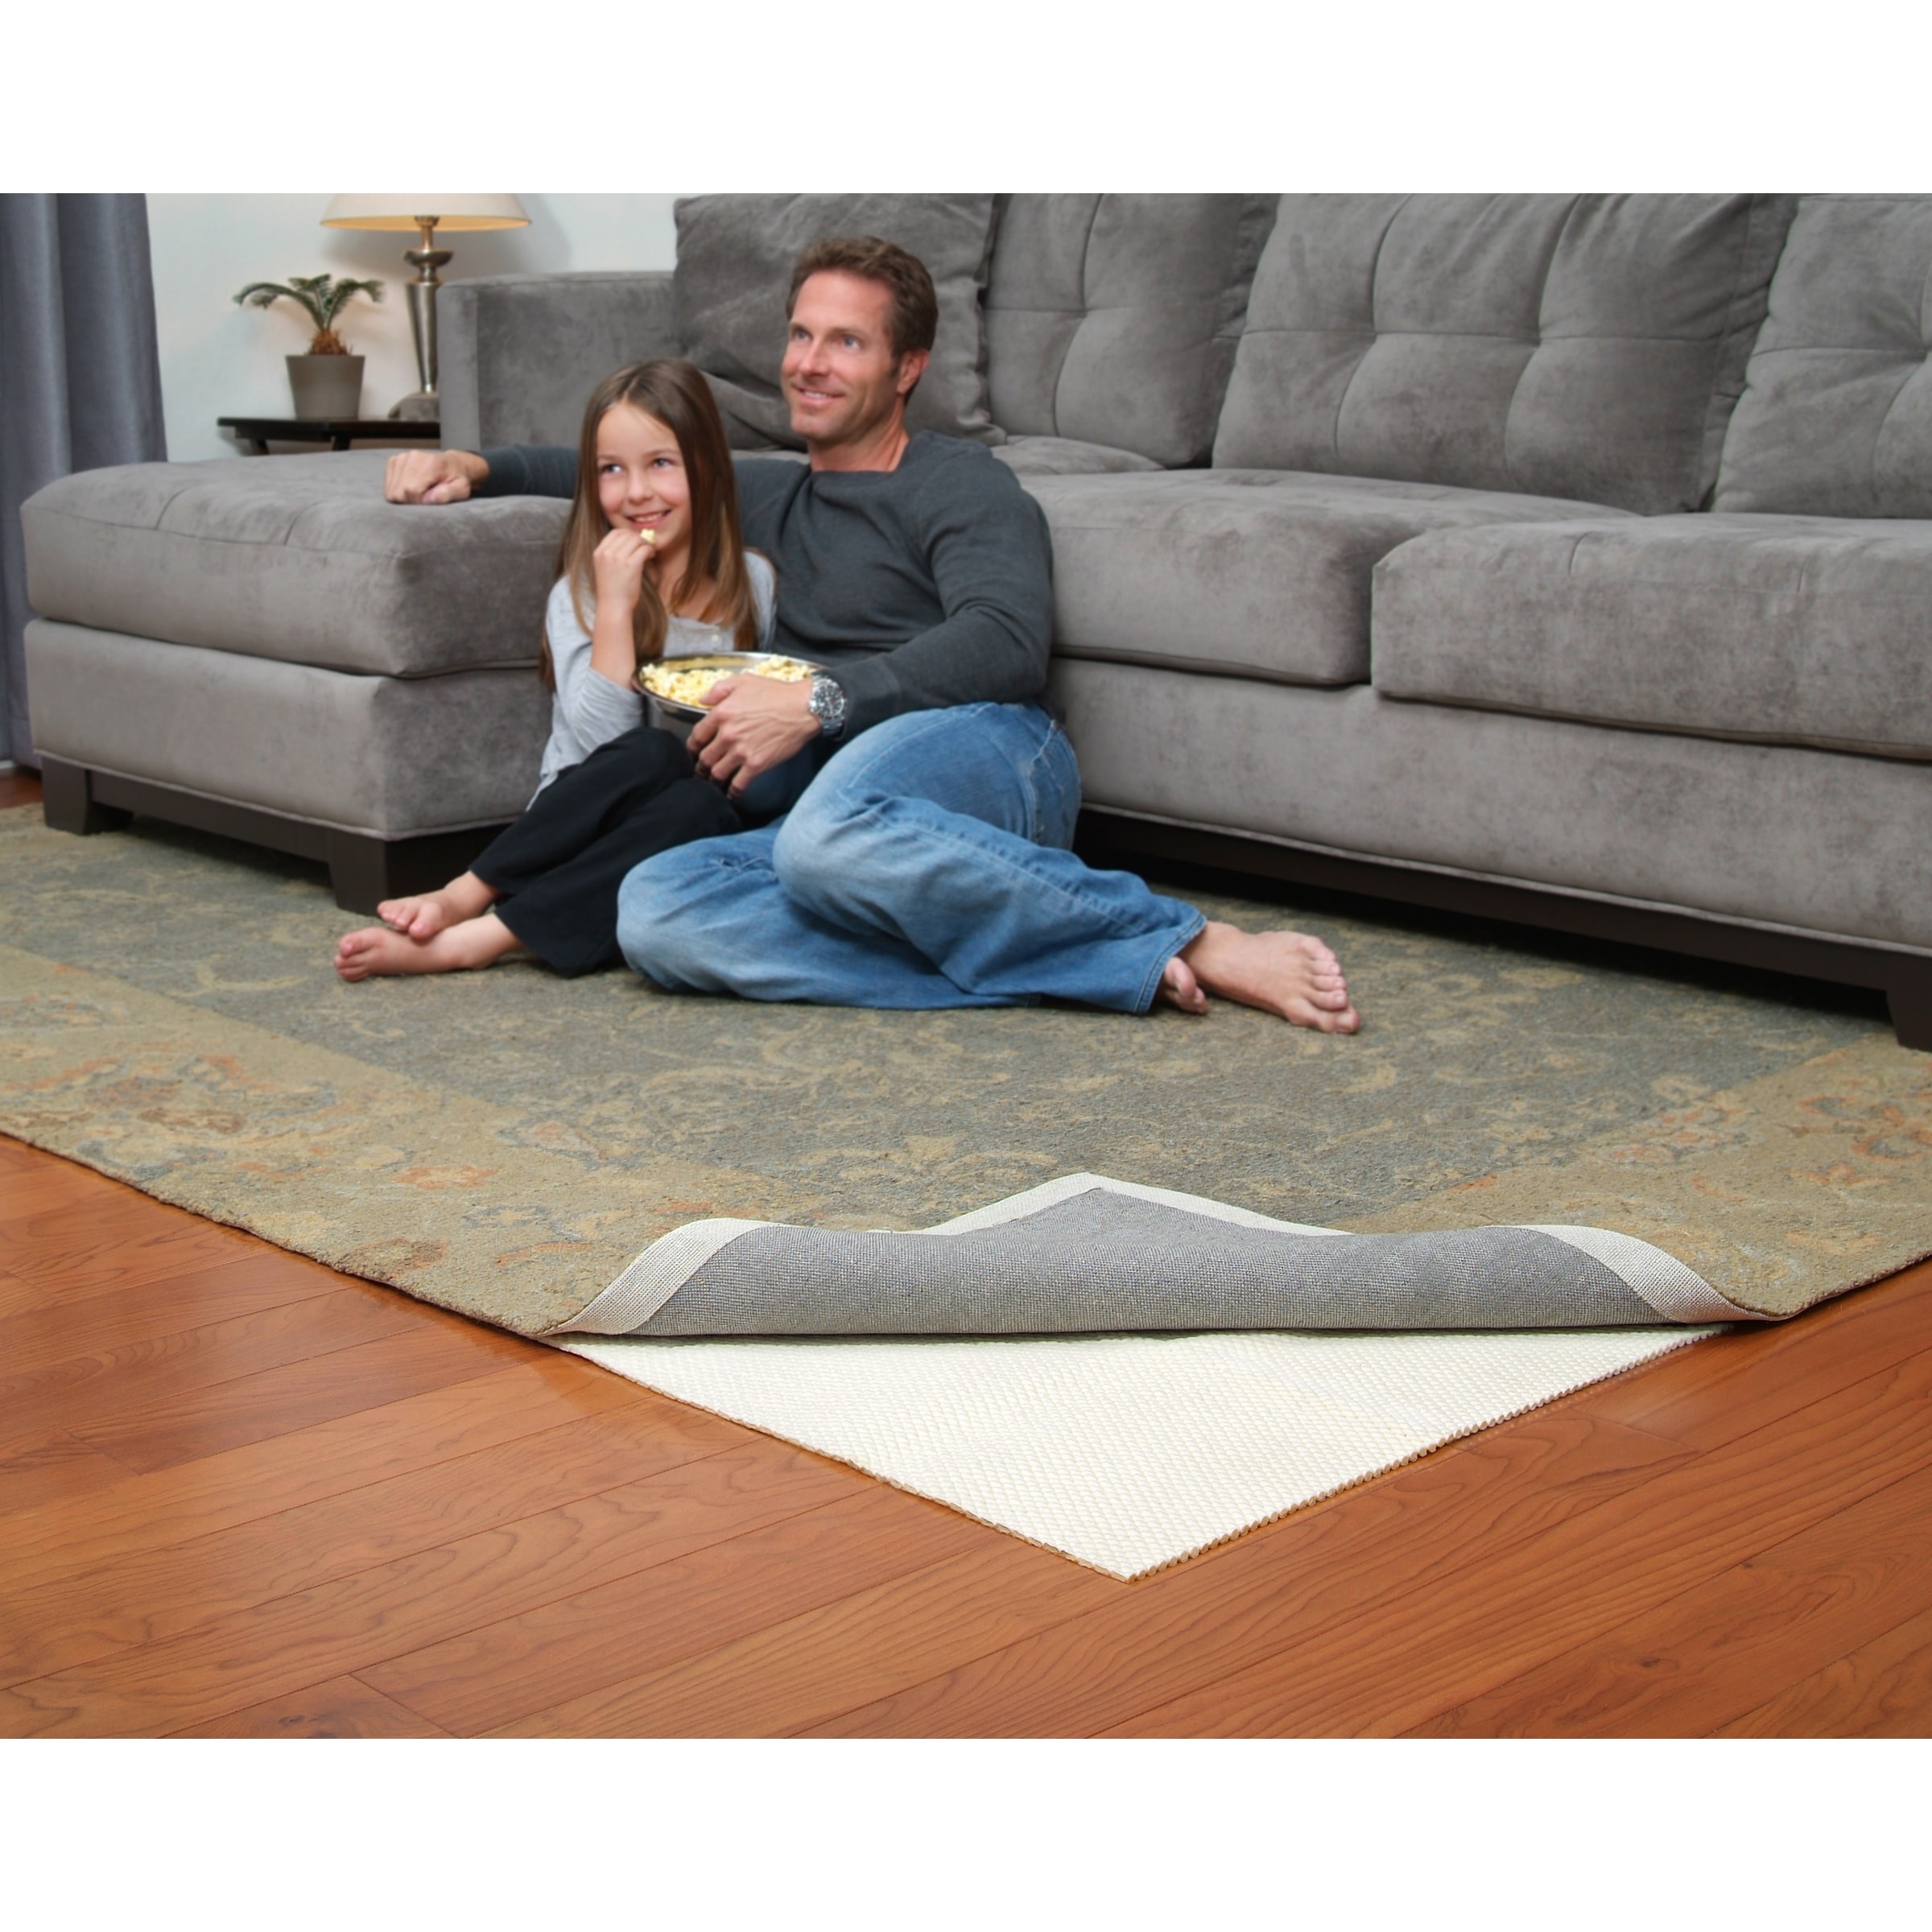 Rug Grip Non Slip Rug Pad by Slip-Stop - Ivory - 2' 6 x 10